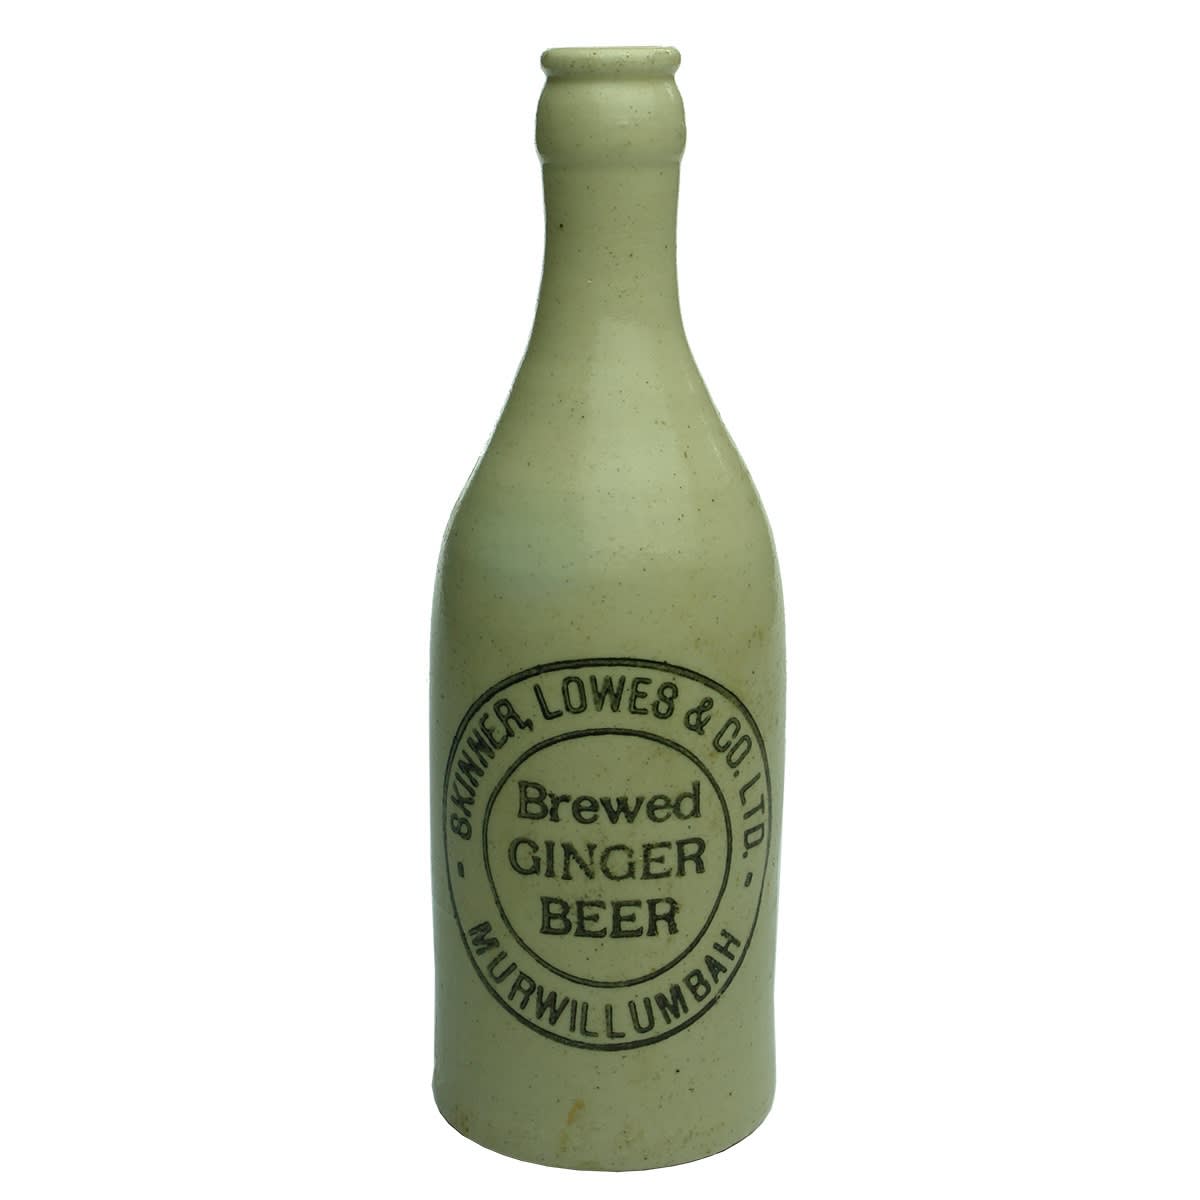 Ginger Beer. Skinner, Lowes & Co. Ltd. Murwillumbah. Crown Seal. All White. (New South Wales)